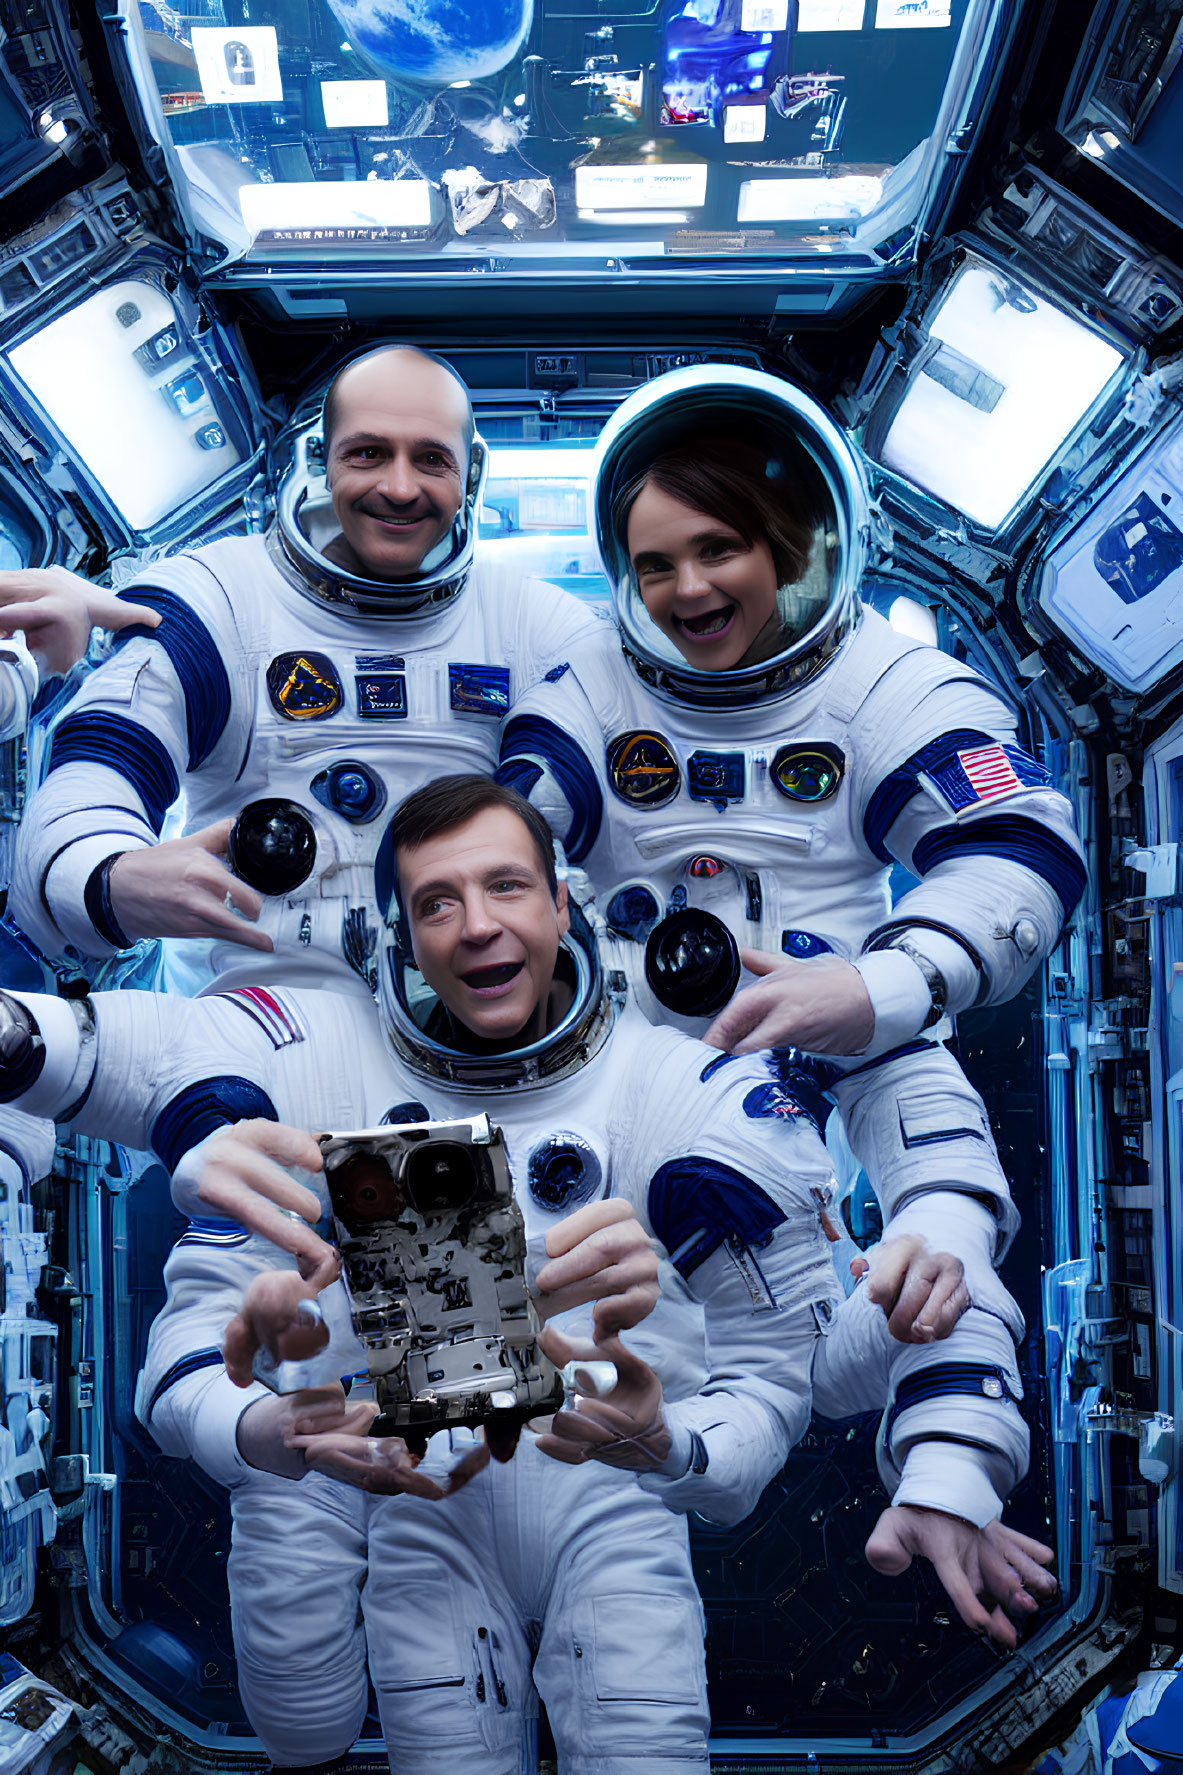 Three astronauts pose with satellite model in space station setup.